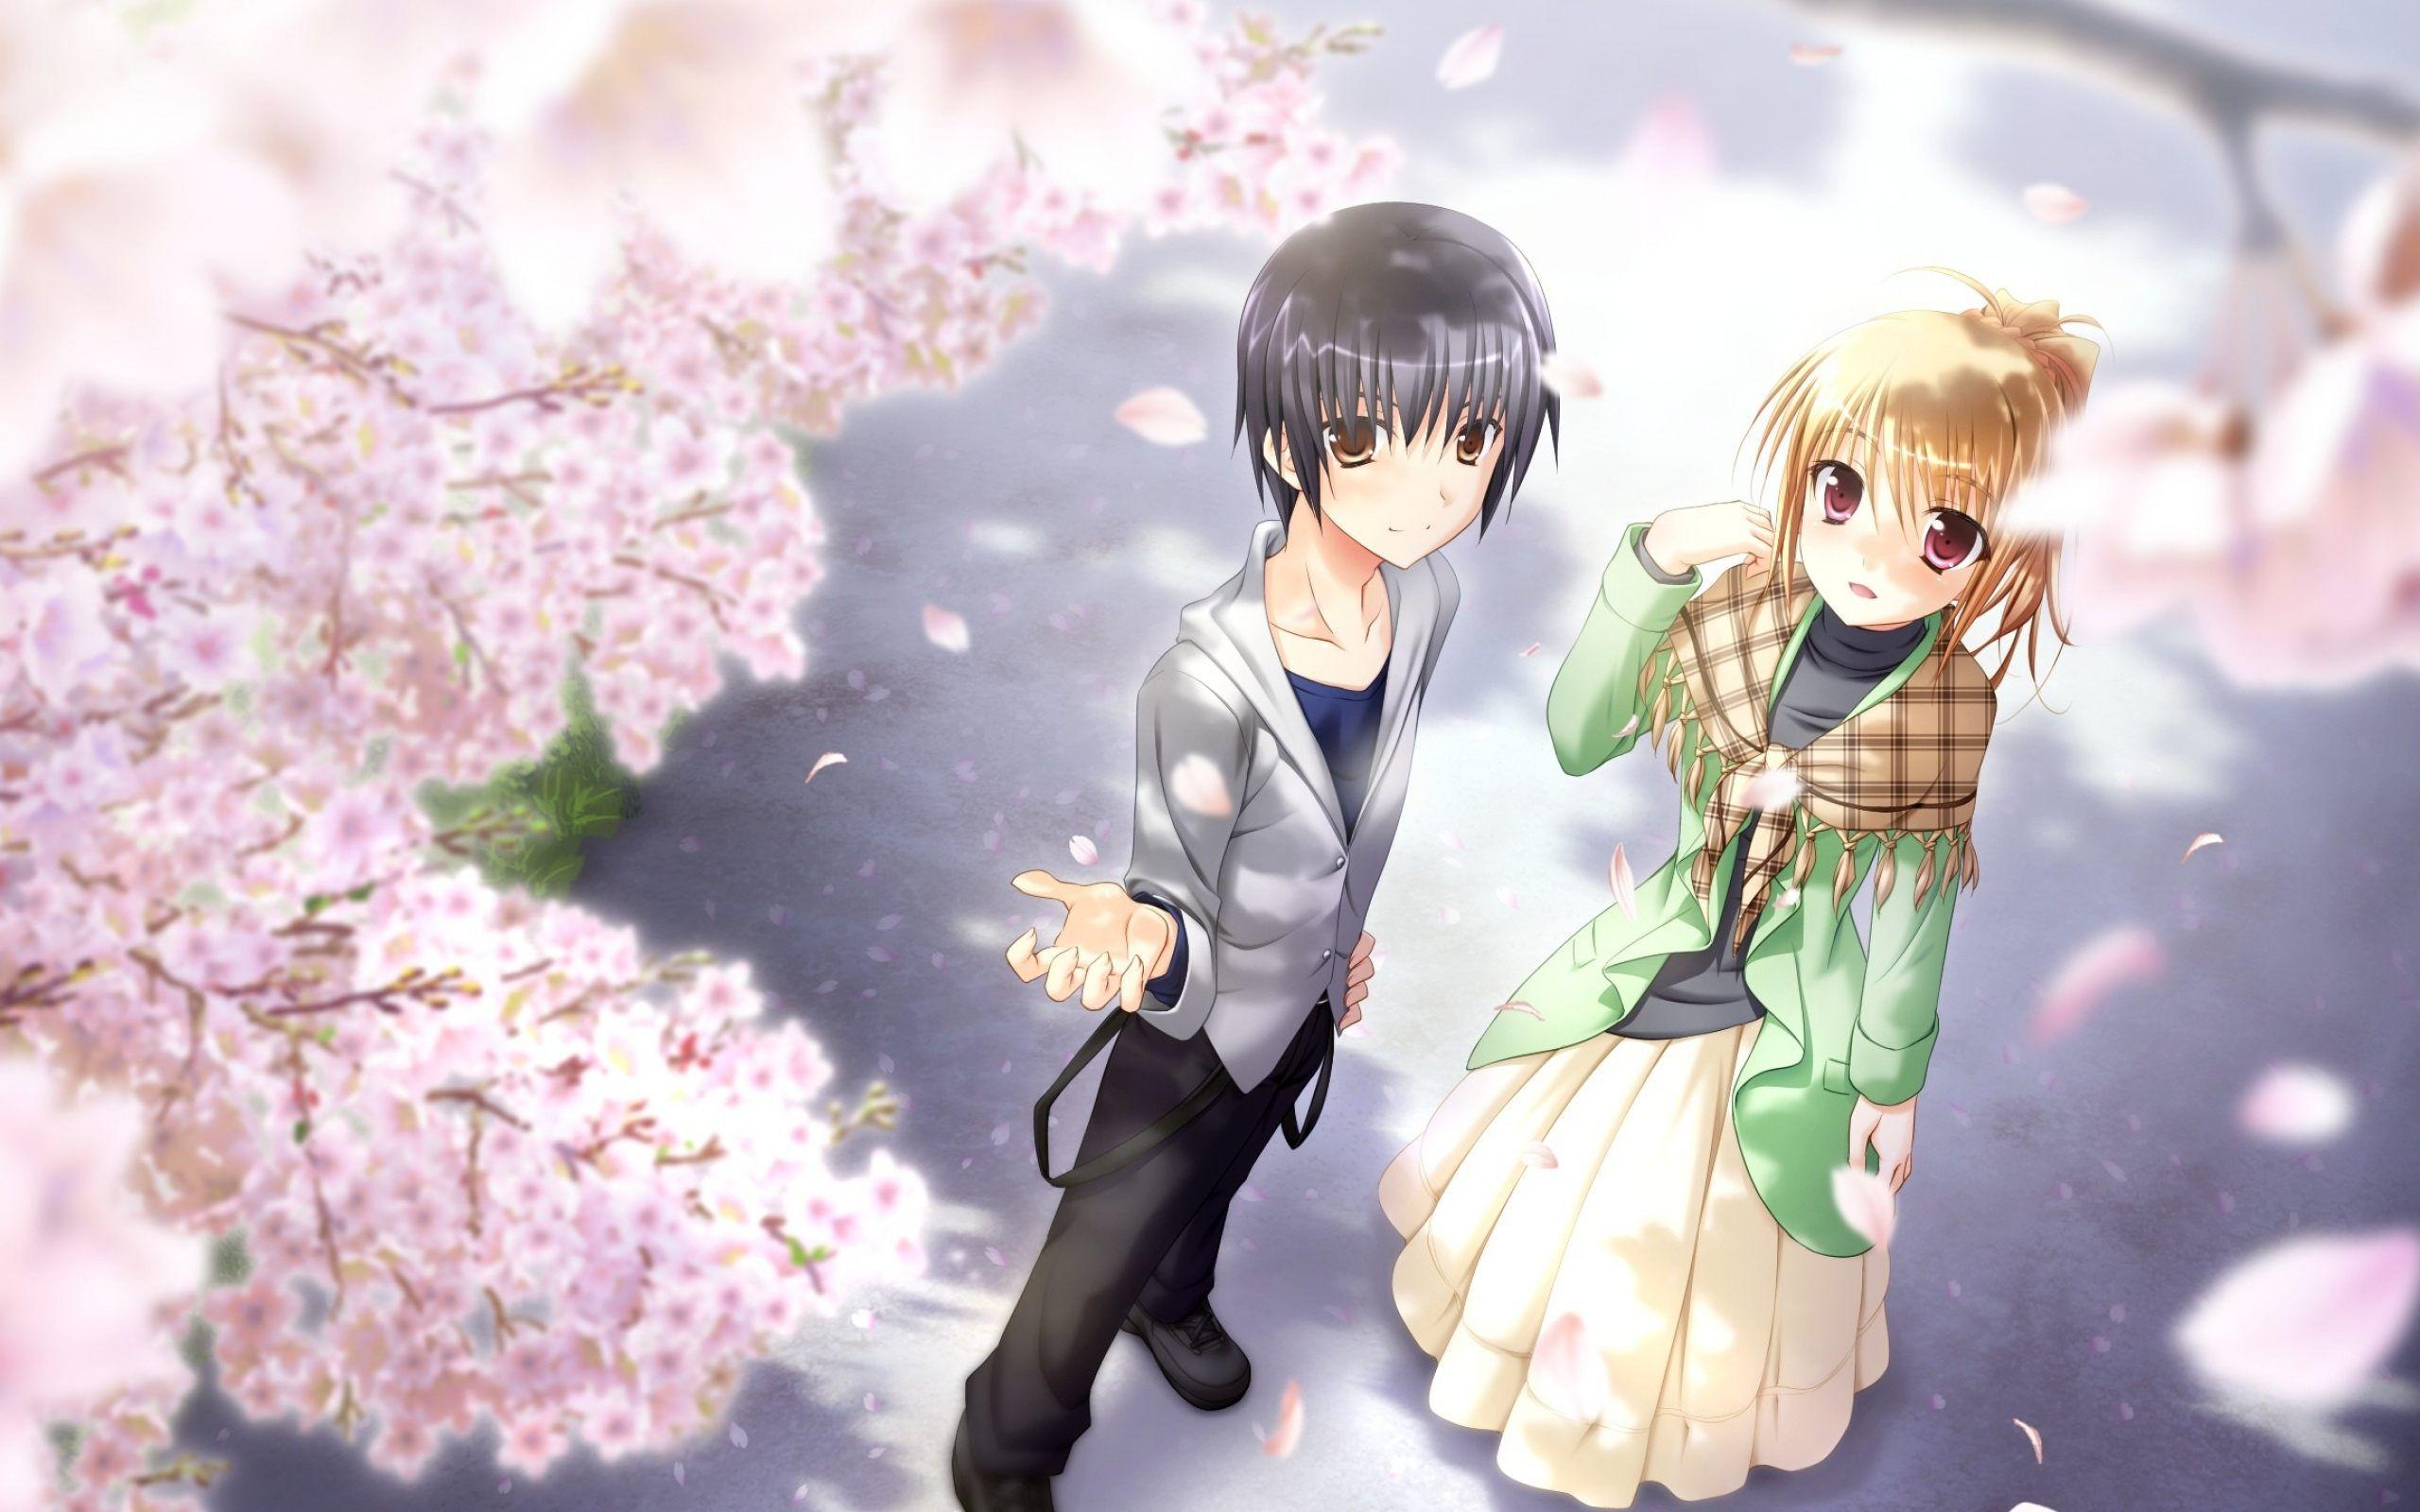 Cute Love Anime Wallpapers - Wallpaper Cave